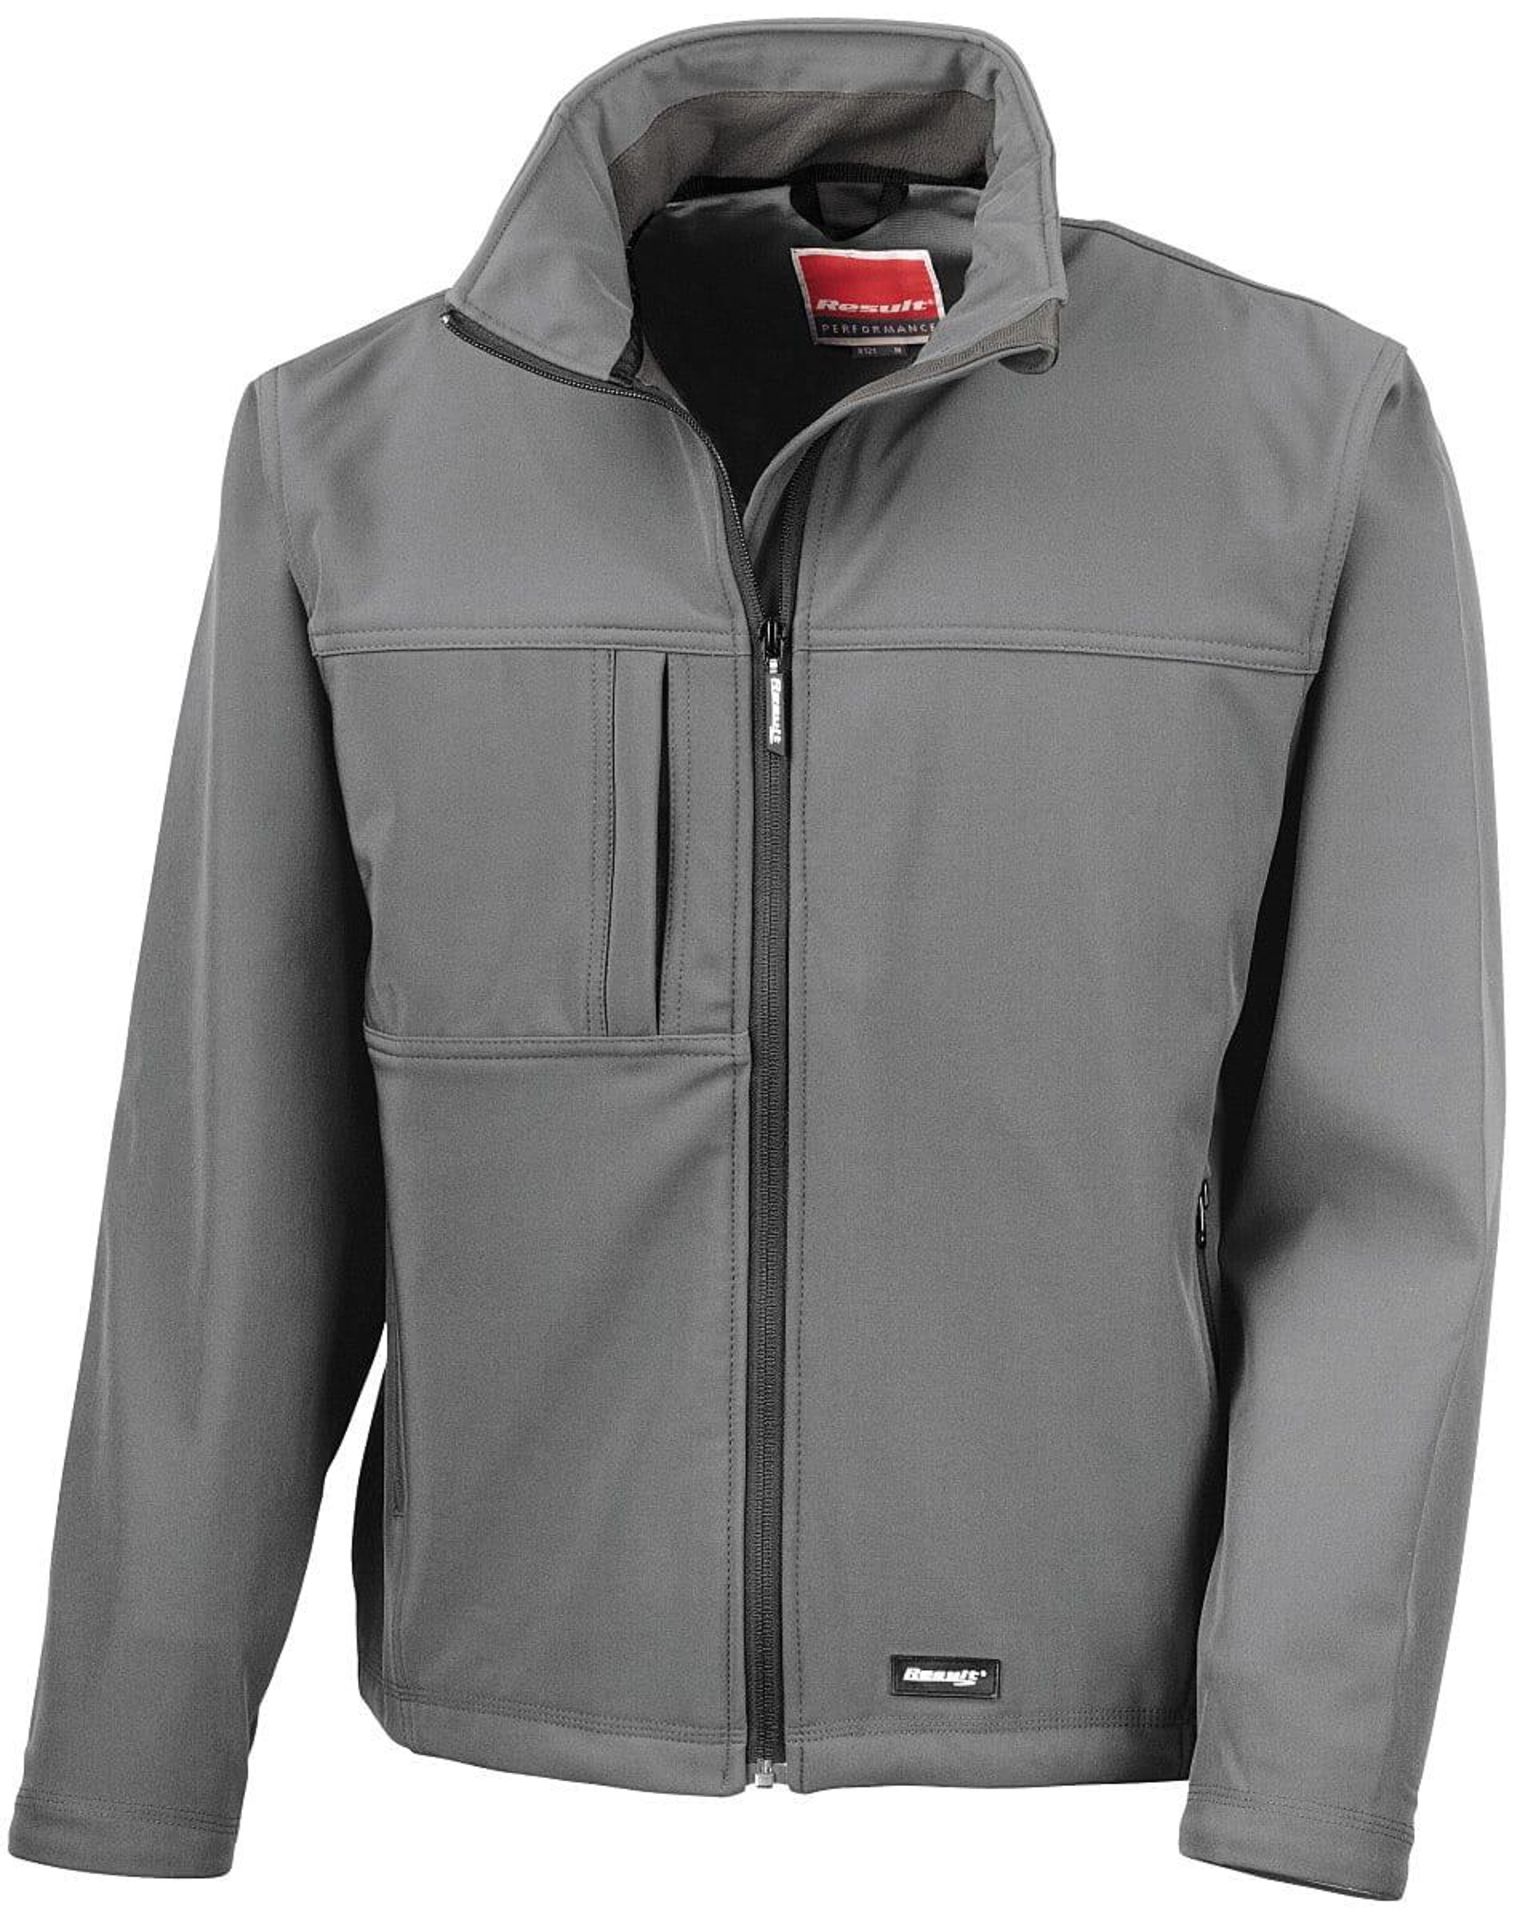 2 x Result Classic Soft Shell Jackets - XL RRP £29.99 ea